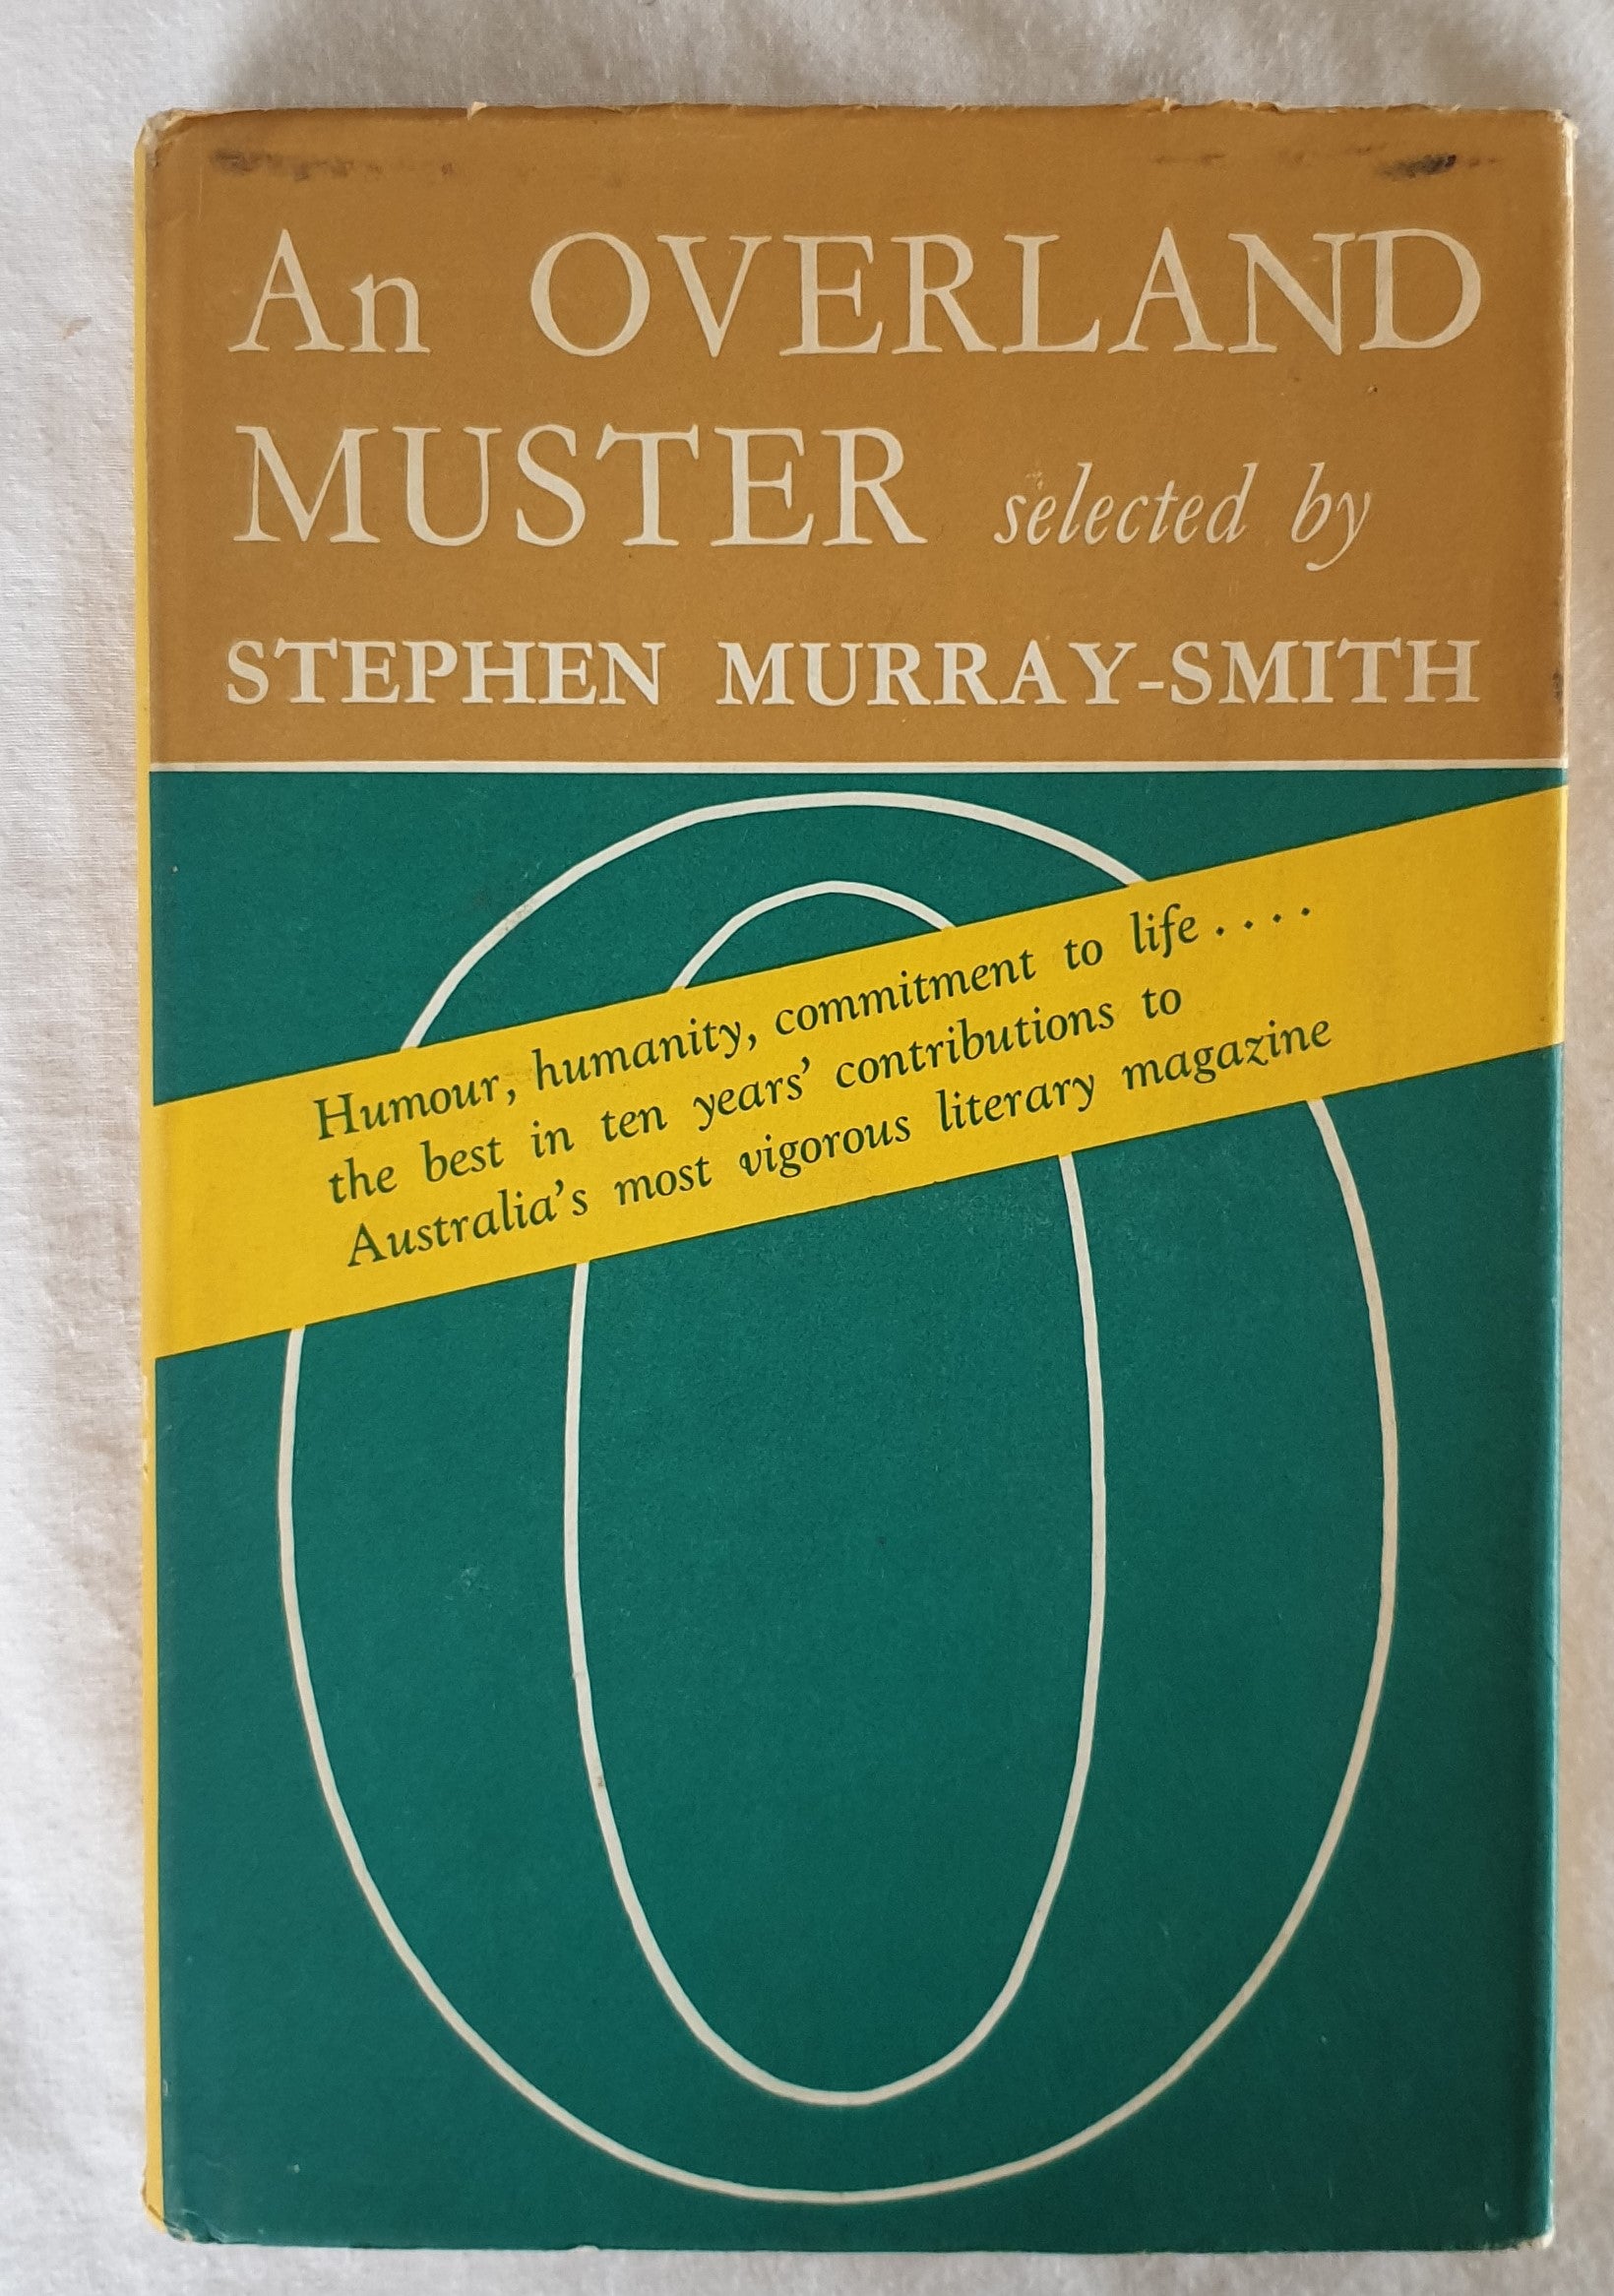 An Overland Muster by Stephen Murray-Smith